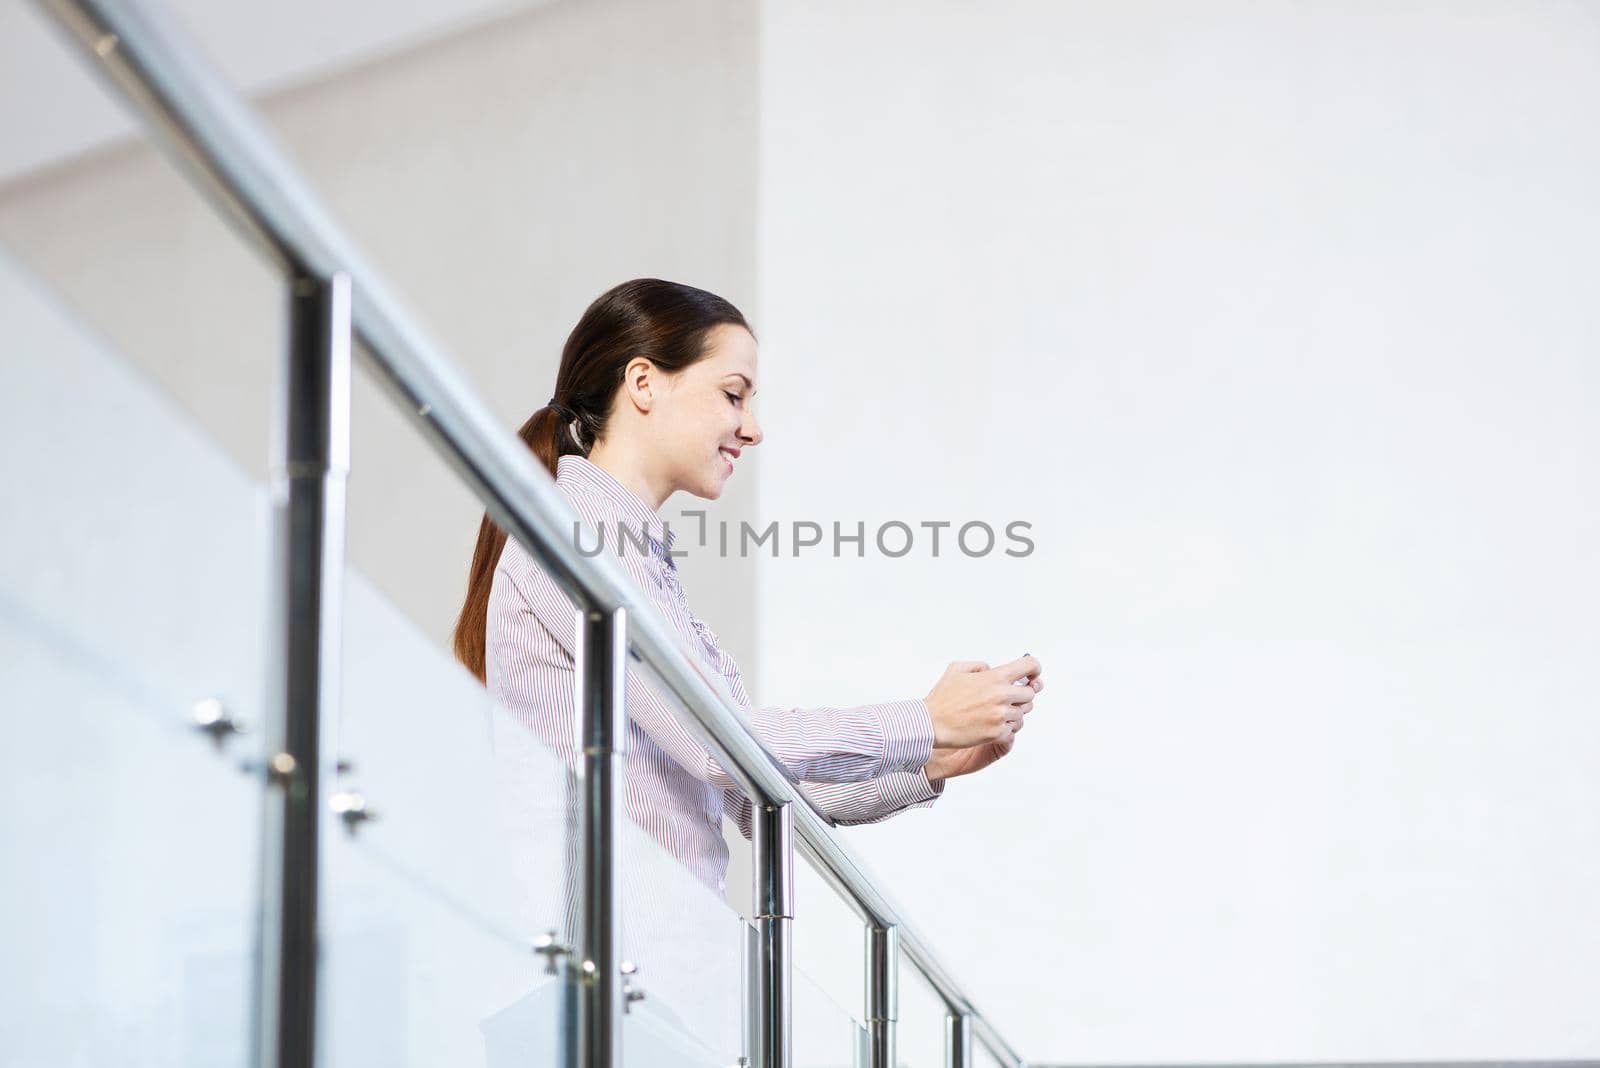 A young woman holds a cell phone. typing in a smartphone.